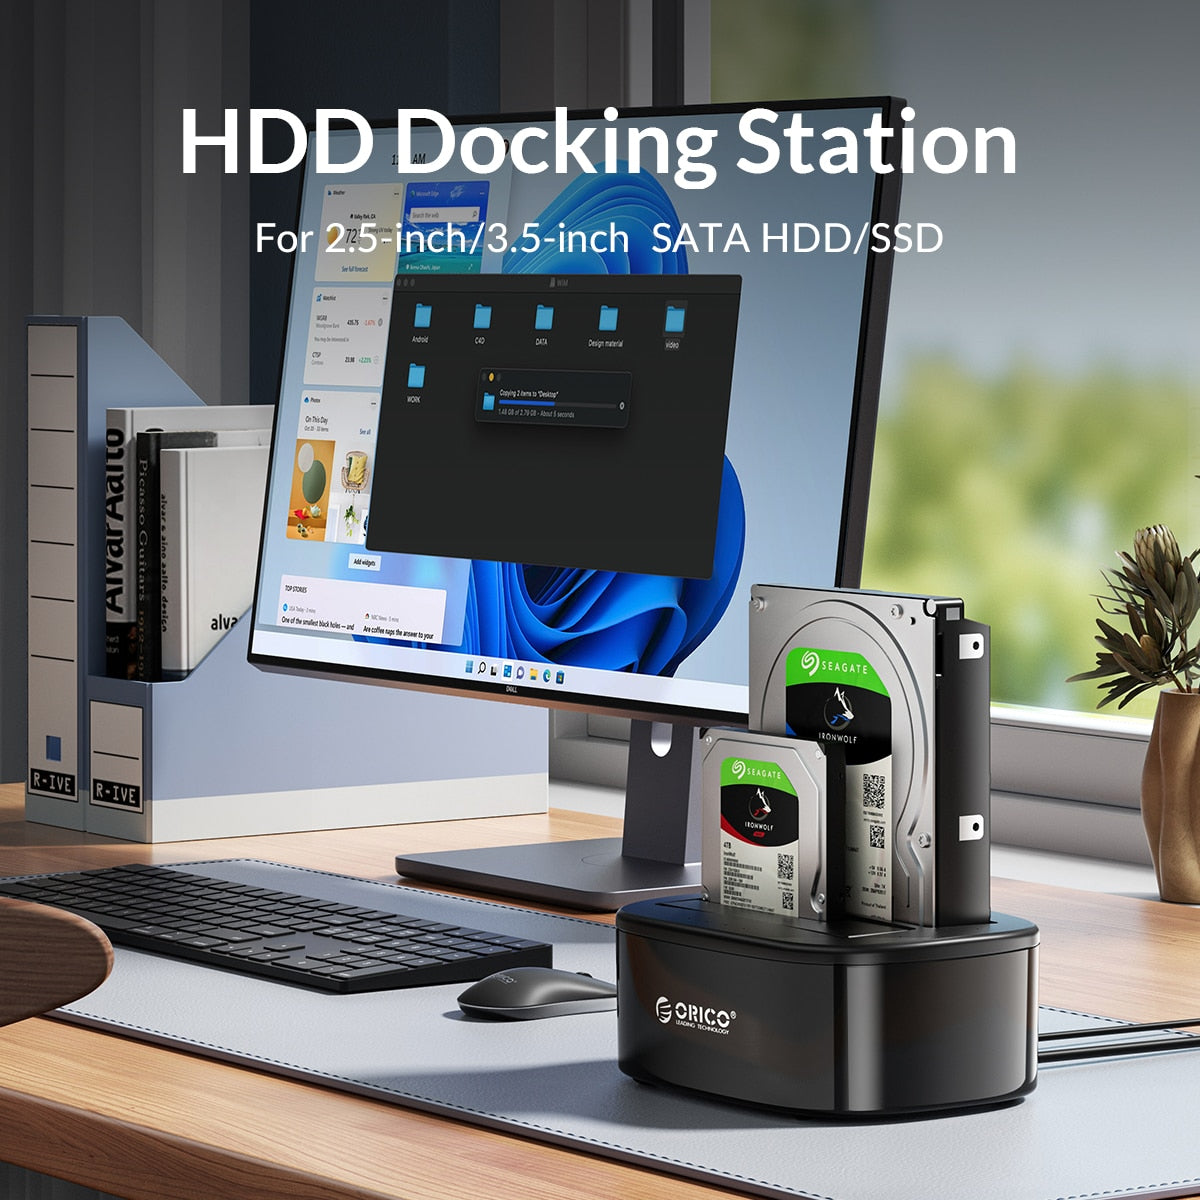 ORICO Dual-bay Hard Drive Docking Station for 2.5/3.5 Inch HDD SSD SATA to USB 3.0 HDD Docking Station with 12V3A Power Adapter